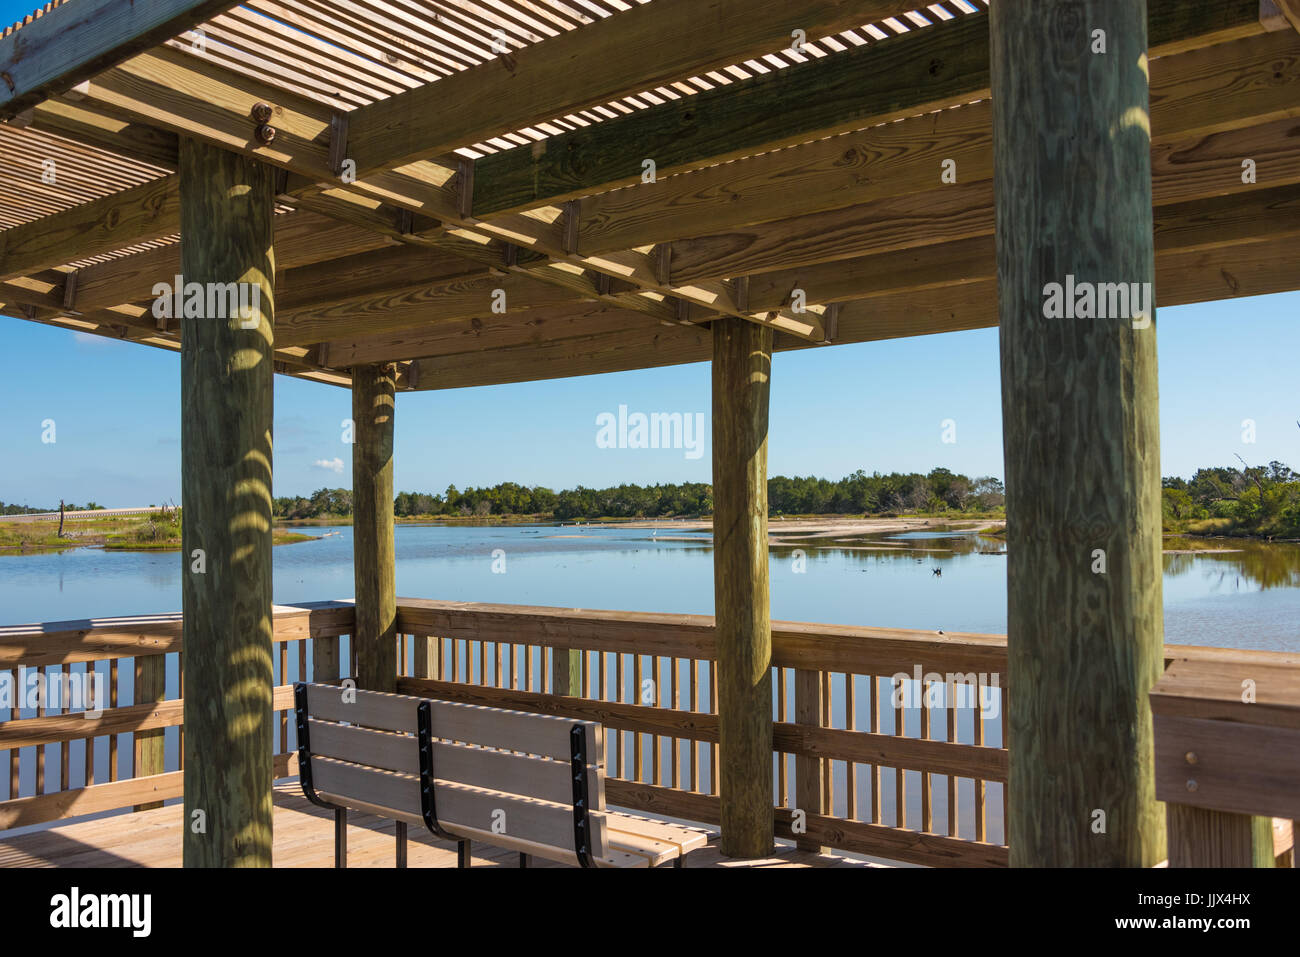 Birdwatching shelter along the Timucuan Trail boardwalk at Simpson Creek in Big Talbot Island State Park in Jacksonville, Florida, USA. Stock Photo